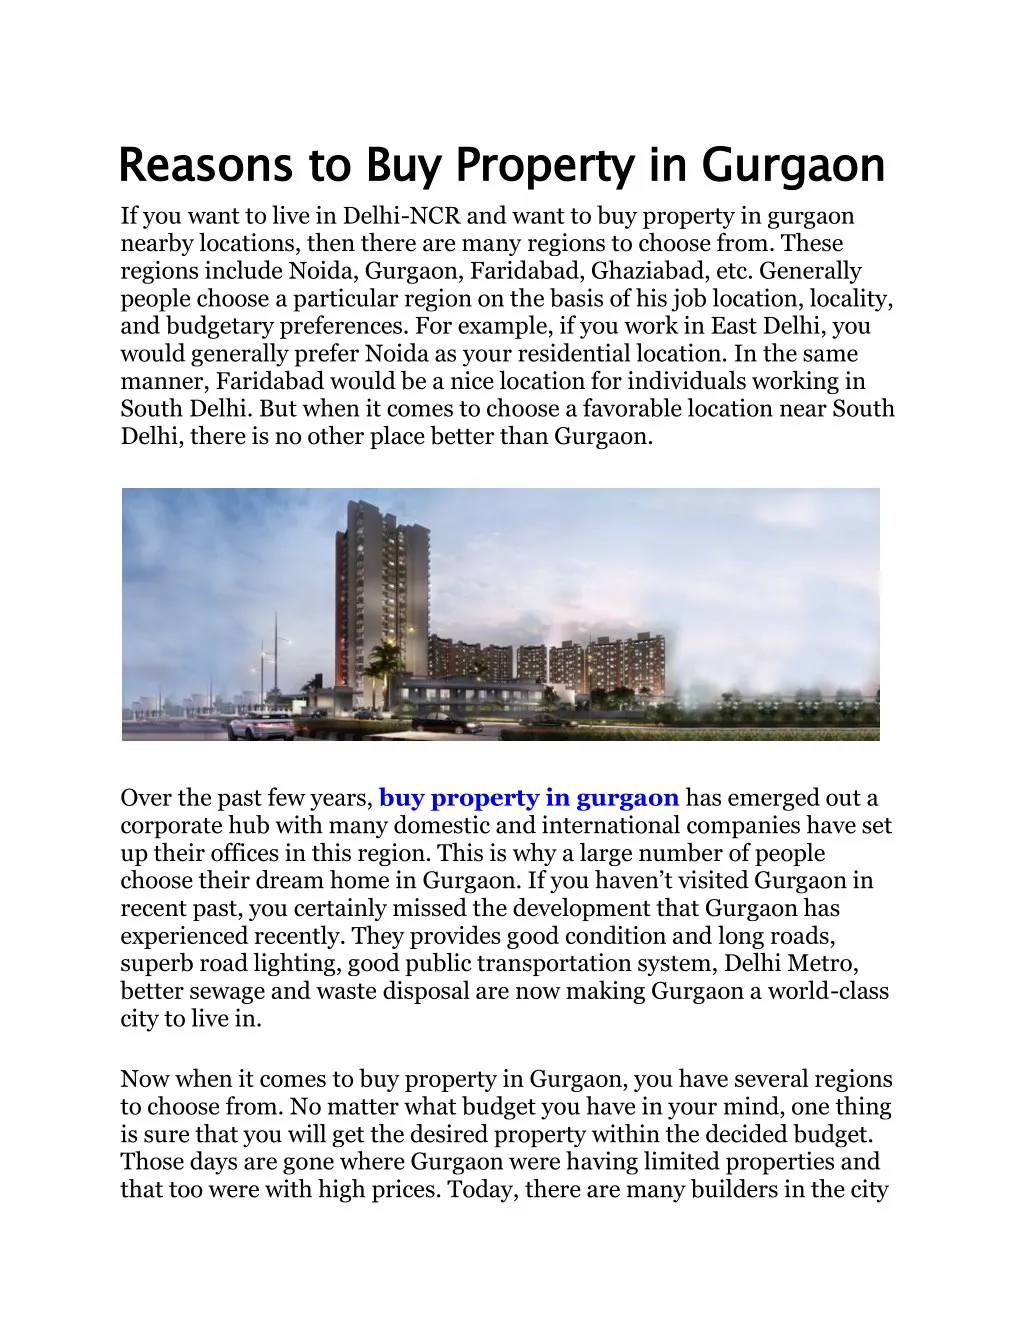 reasons to buy property in if you want to live